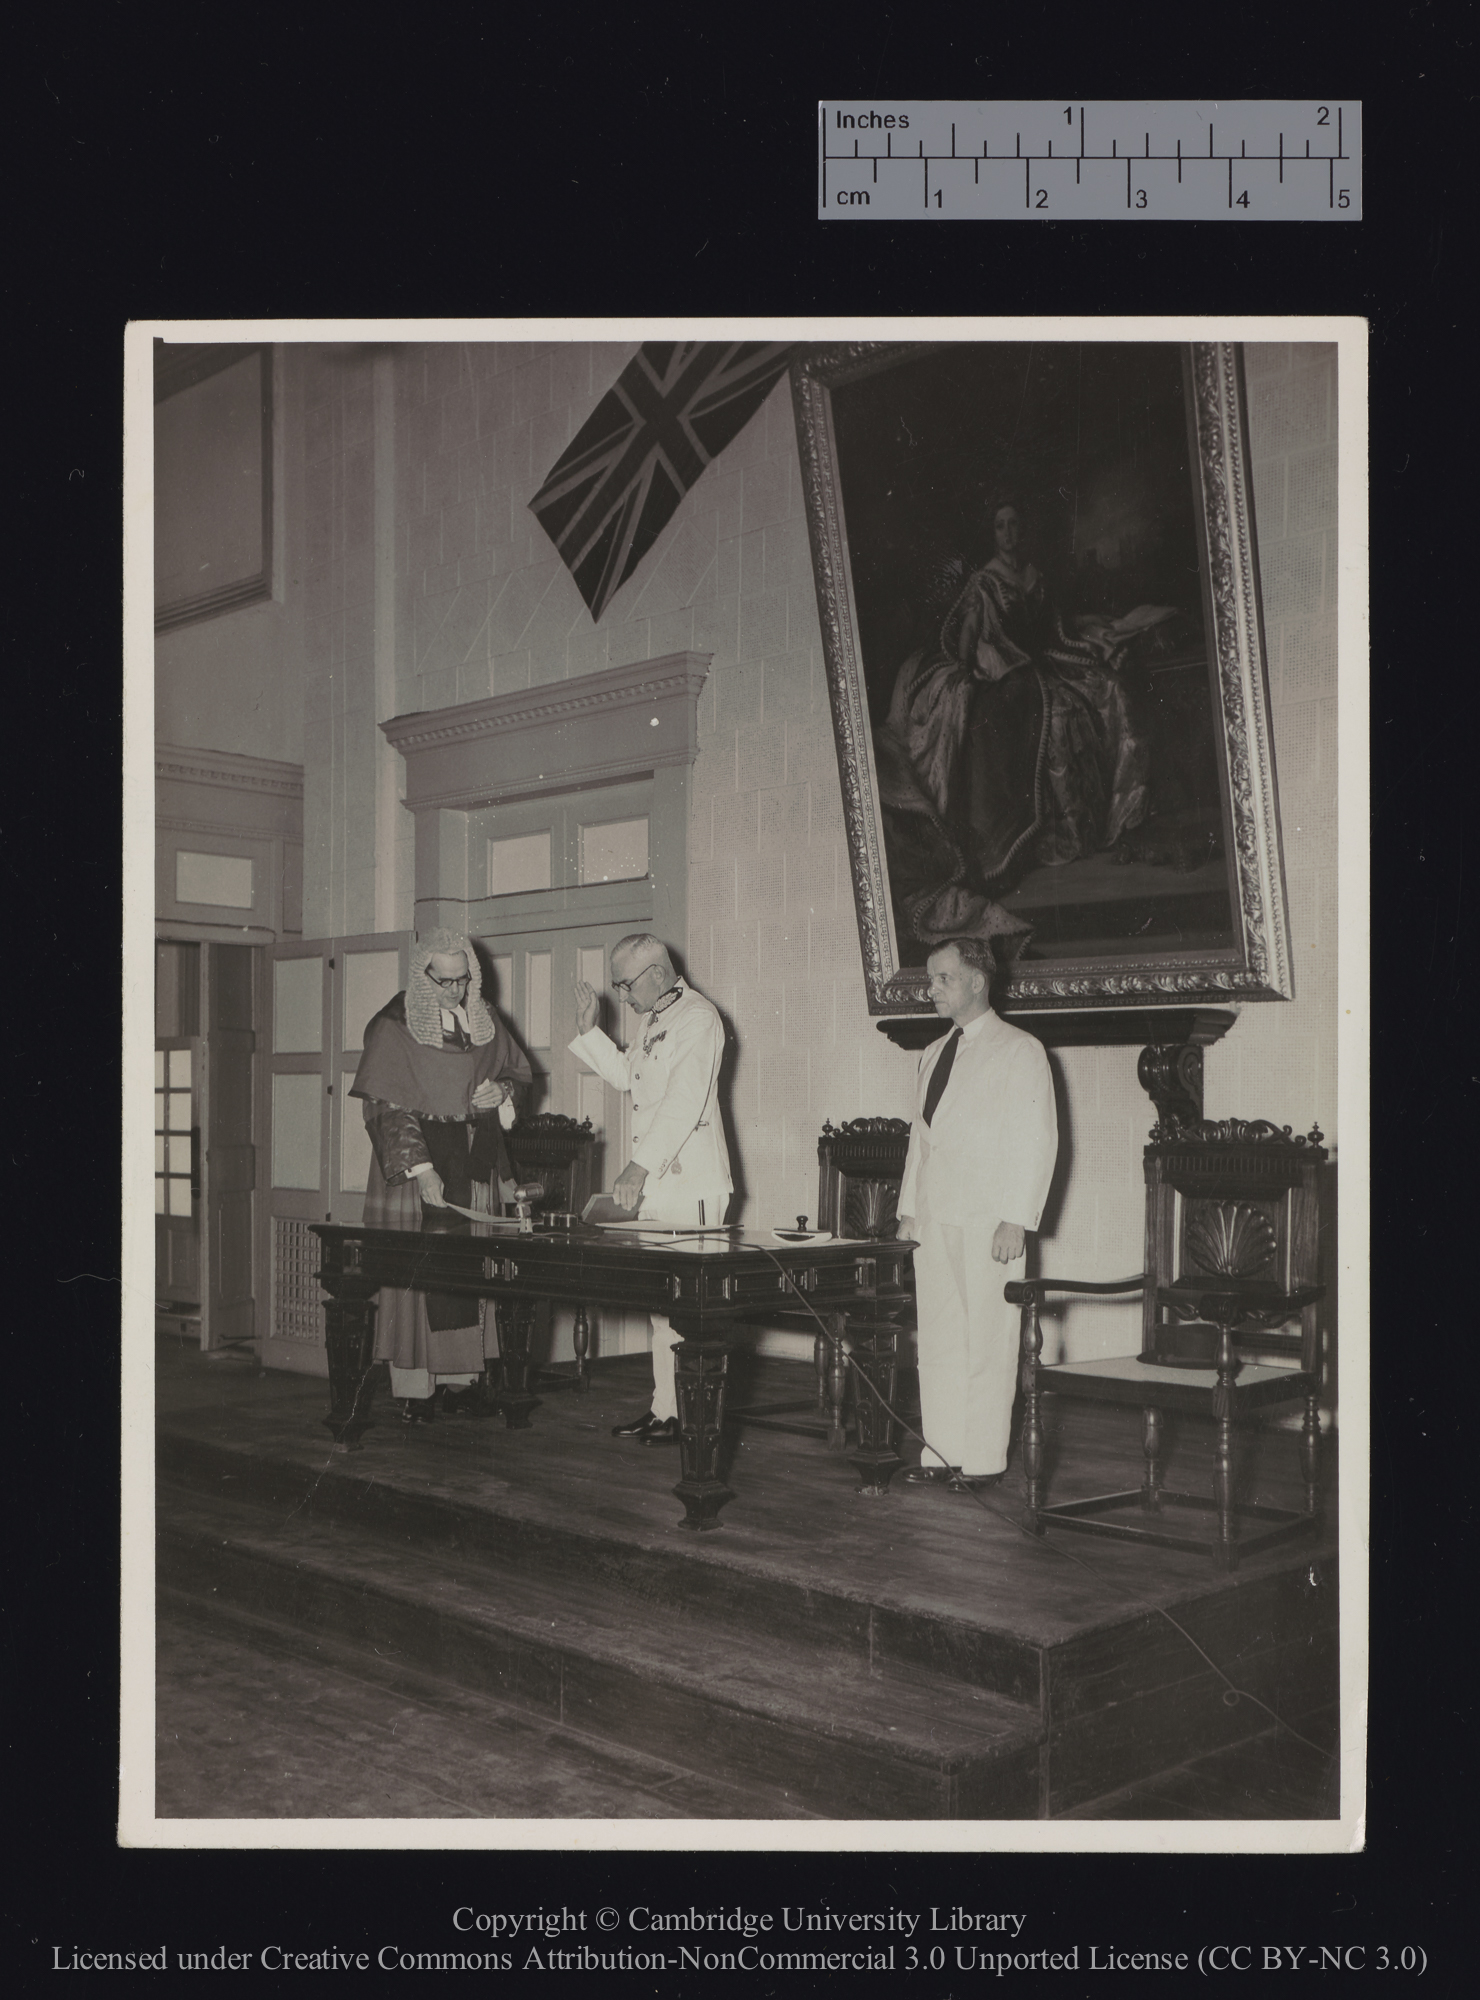 P.A.B. McKerron taking oath of office as Officer Administrating the Government, Singapore, 1947, 1947